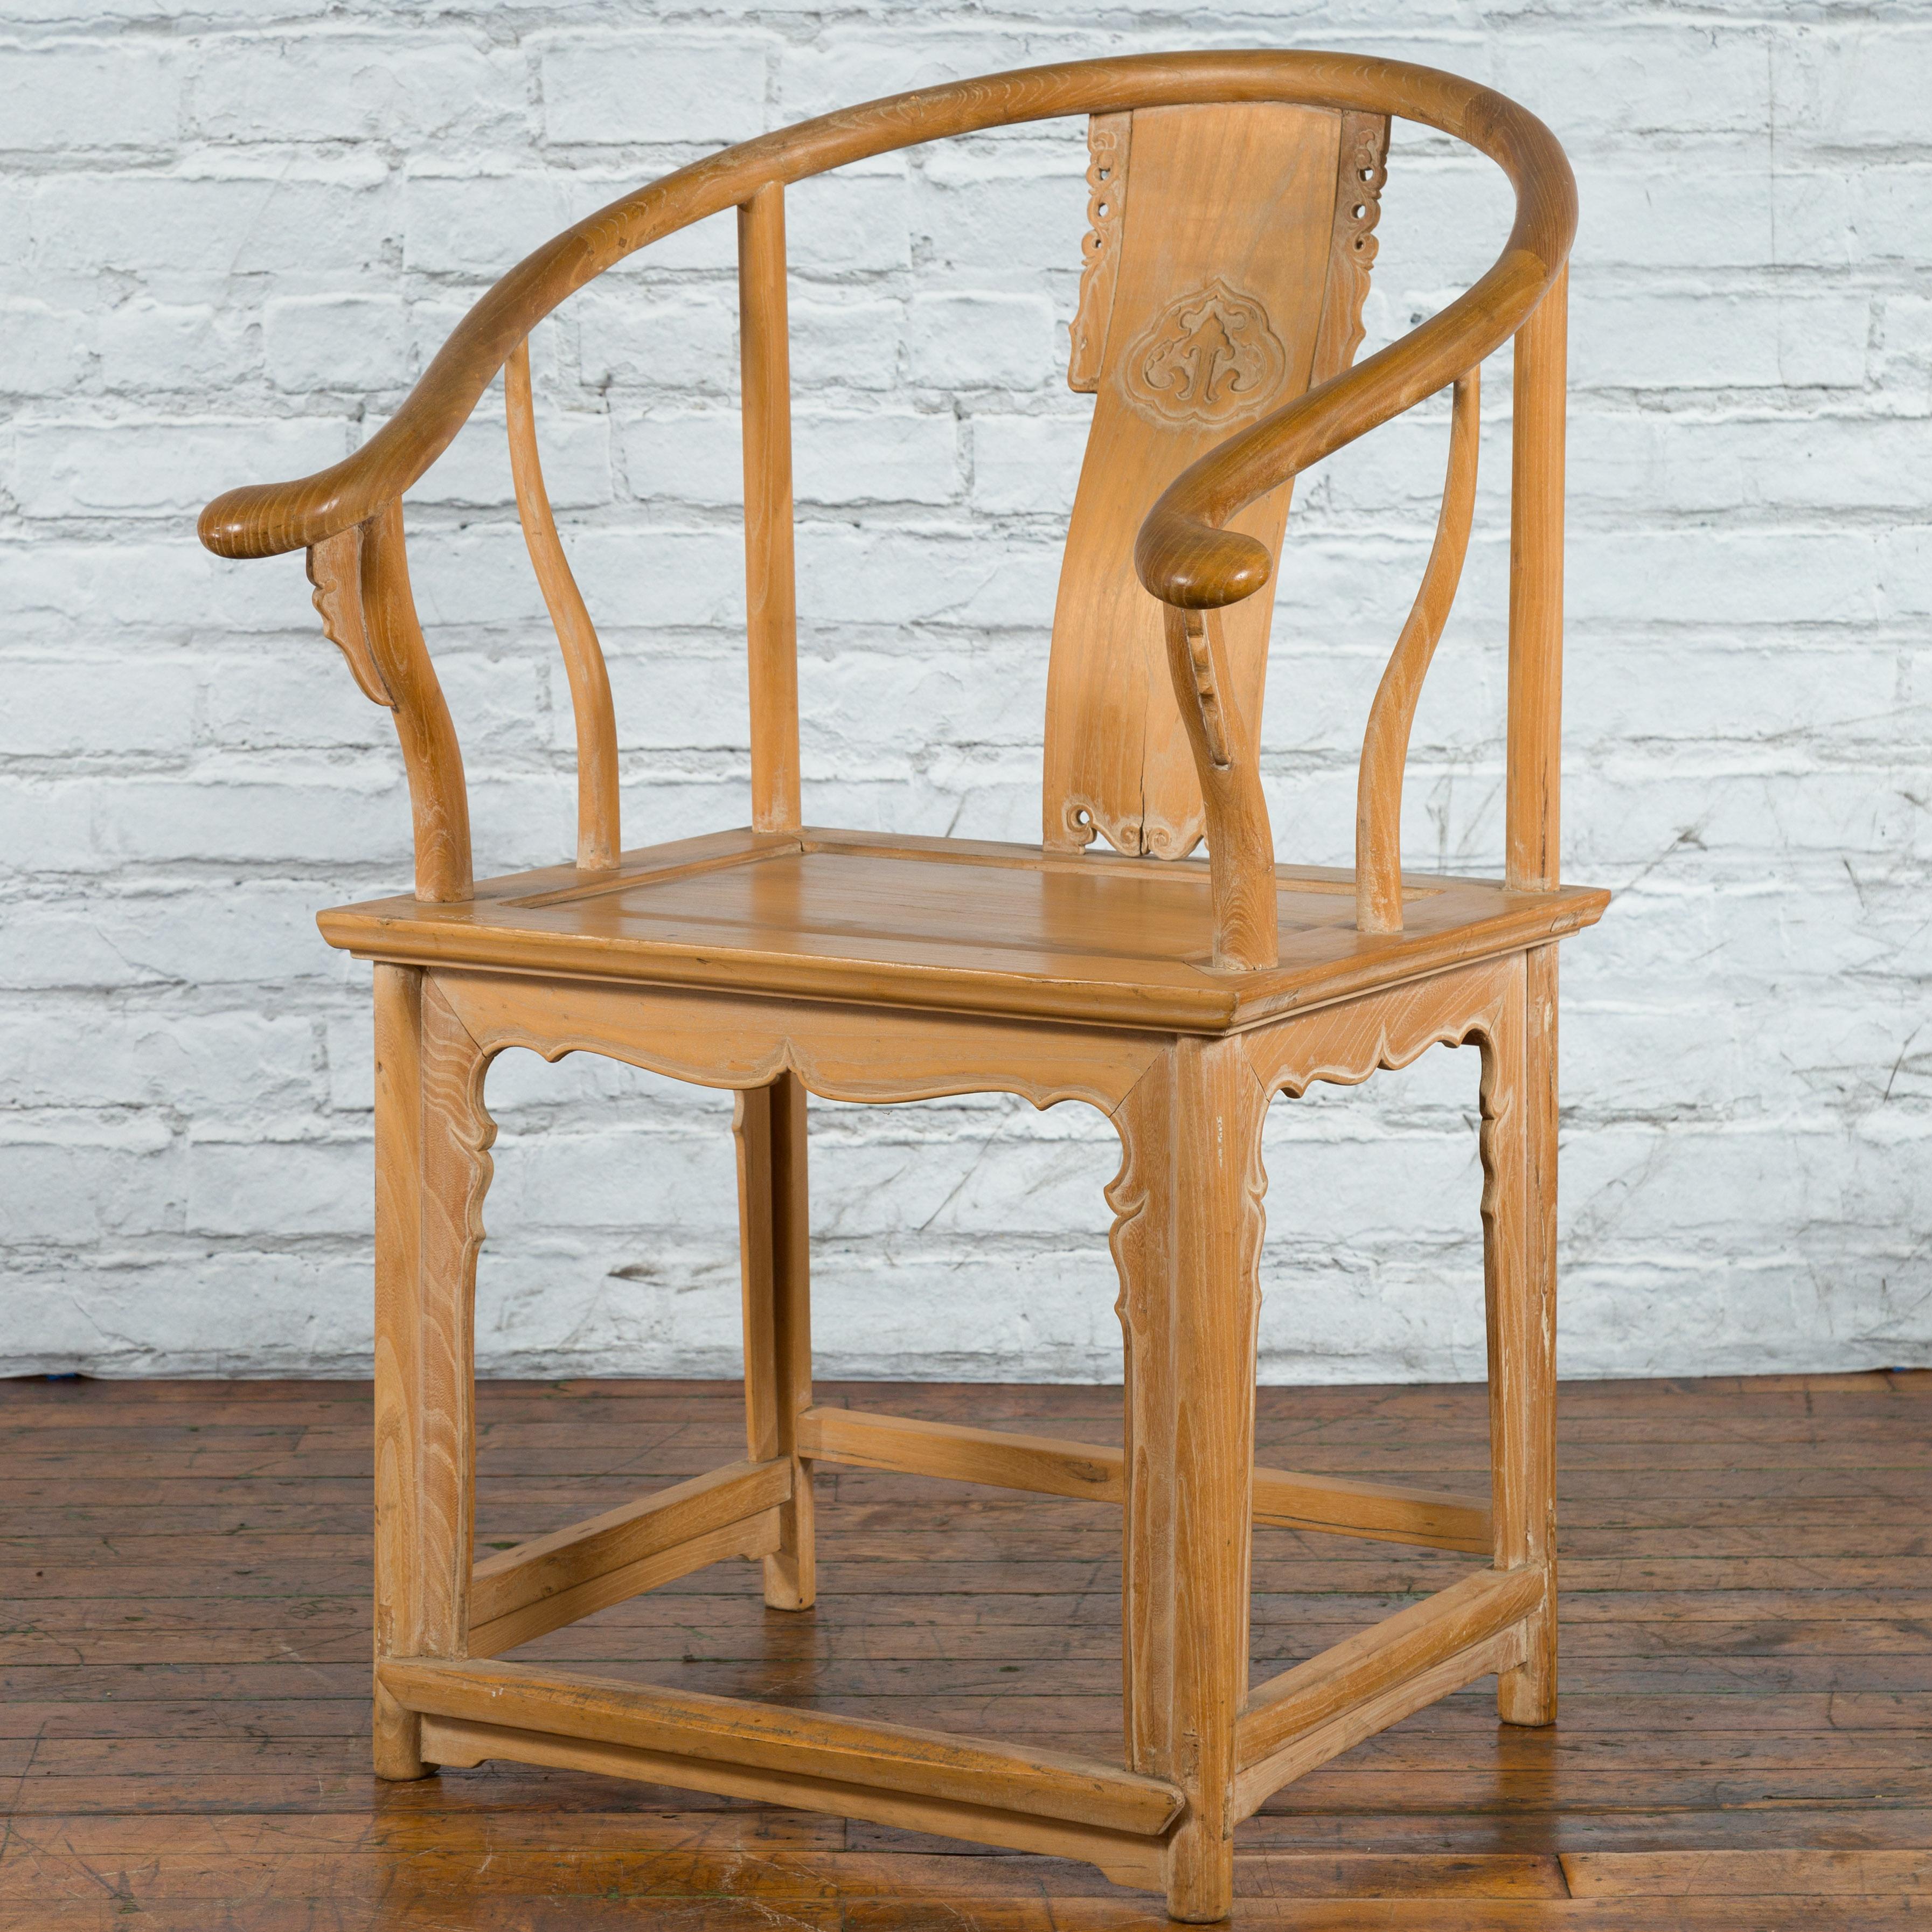 A Chinese Ming dynasty style natural wood horseshoe back armchair from the mid 20th century, with carved splat and apron. Born in China during the mid-century period, this armchair charms our eyes with its natural wooden finish and graceful lines.